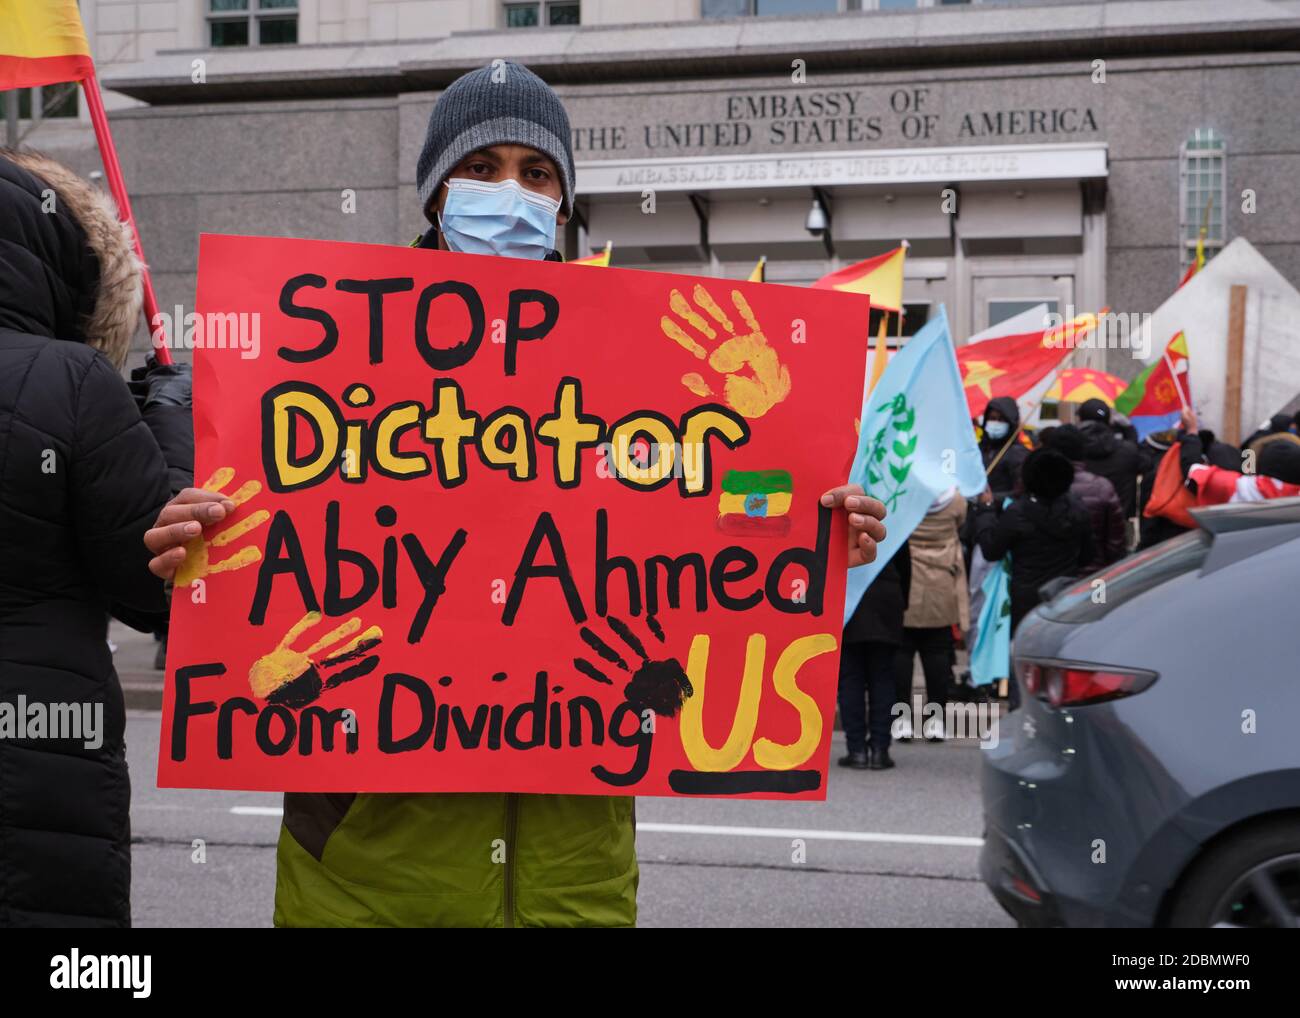 Ottawa, Canada. November 17th, 2020. Protester with a sign 'Stop Dictator Abiy Ahmad from dividing US' part of Over 300 people took to the streets of Ottawa to protest the war in Tigray region of Ethiopia and the offensive undertaken by Prime Minister Abiy Ahmed against them. They stopped in front of the Embassy of the United States of America to demand intervention in the conflict. Abiy, last year's Nobel Peace Prize winner, continues to reject international pleas for dialogue and de-escalation in the two-week conflict. Credit: meanderingemu/Alamy Live News Stock Photo